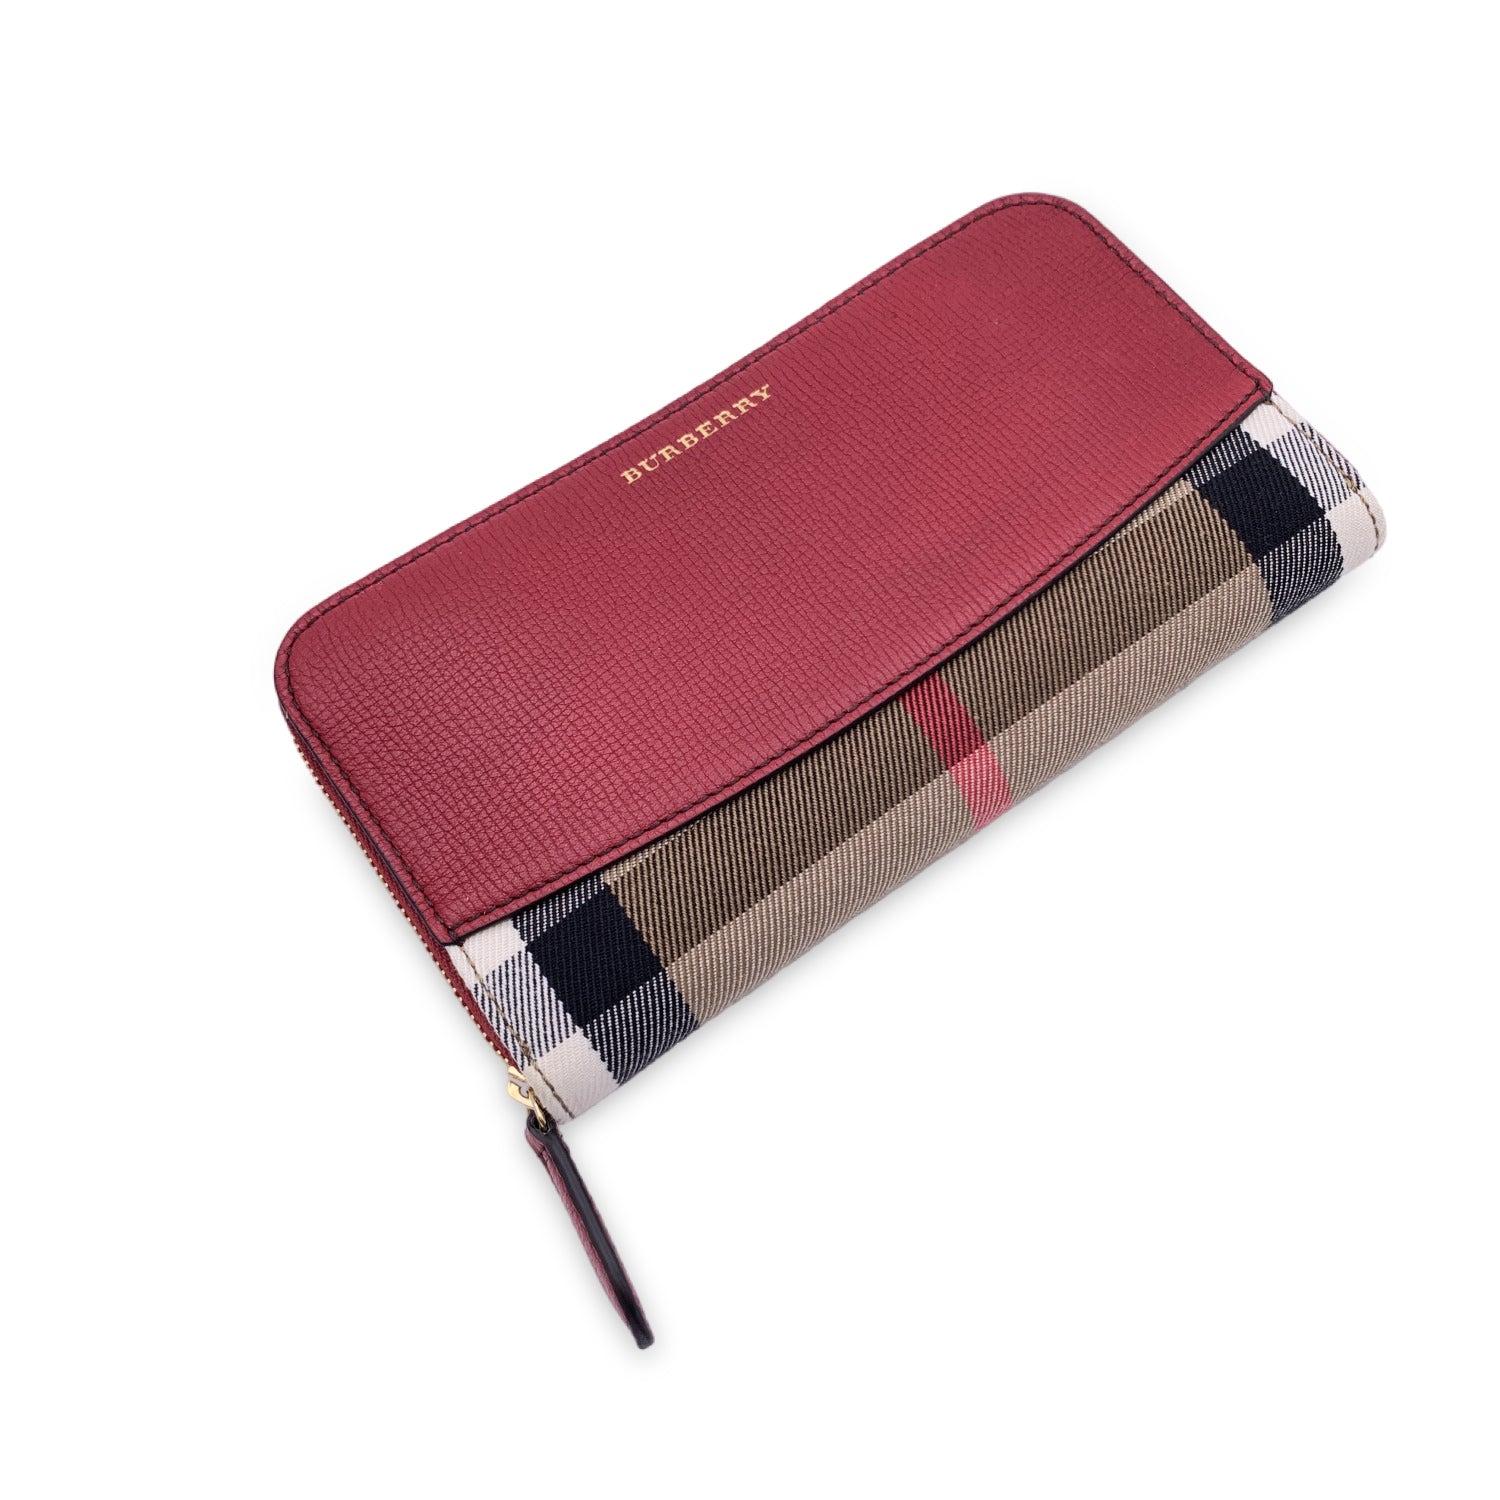 Burberry 'Elmore' Zippy Wallet crafted in checkered nova check canvas and red leather. Zip closure. Burberry signature embossed on the front. It features 2 main compartments for bill, 2 flat open pockets, 1 zip coin compartment, 12 credit card